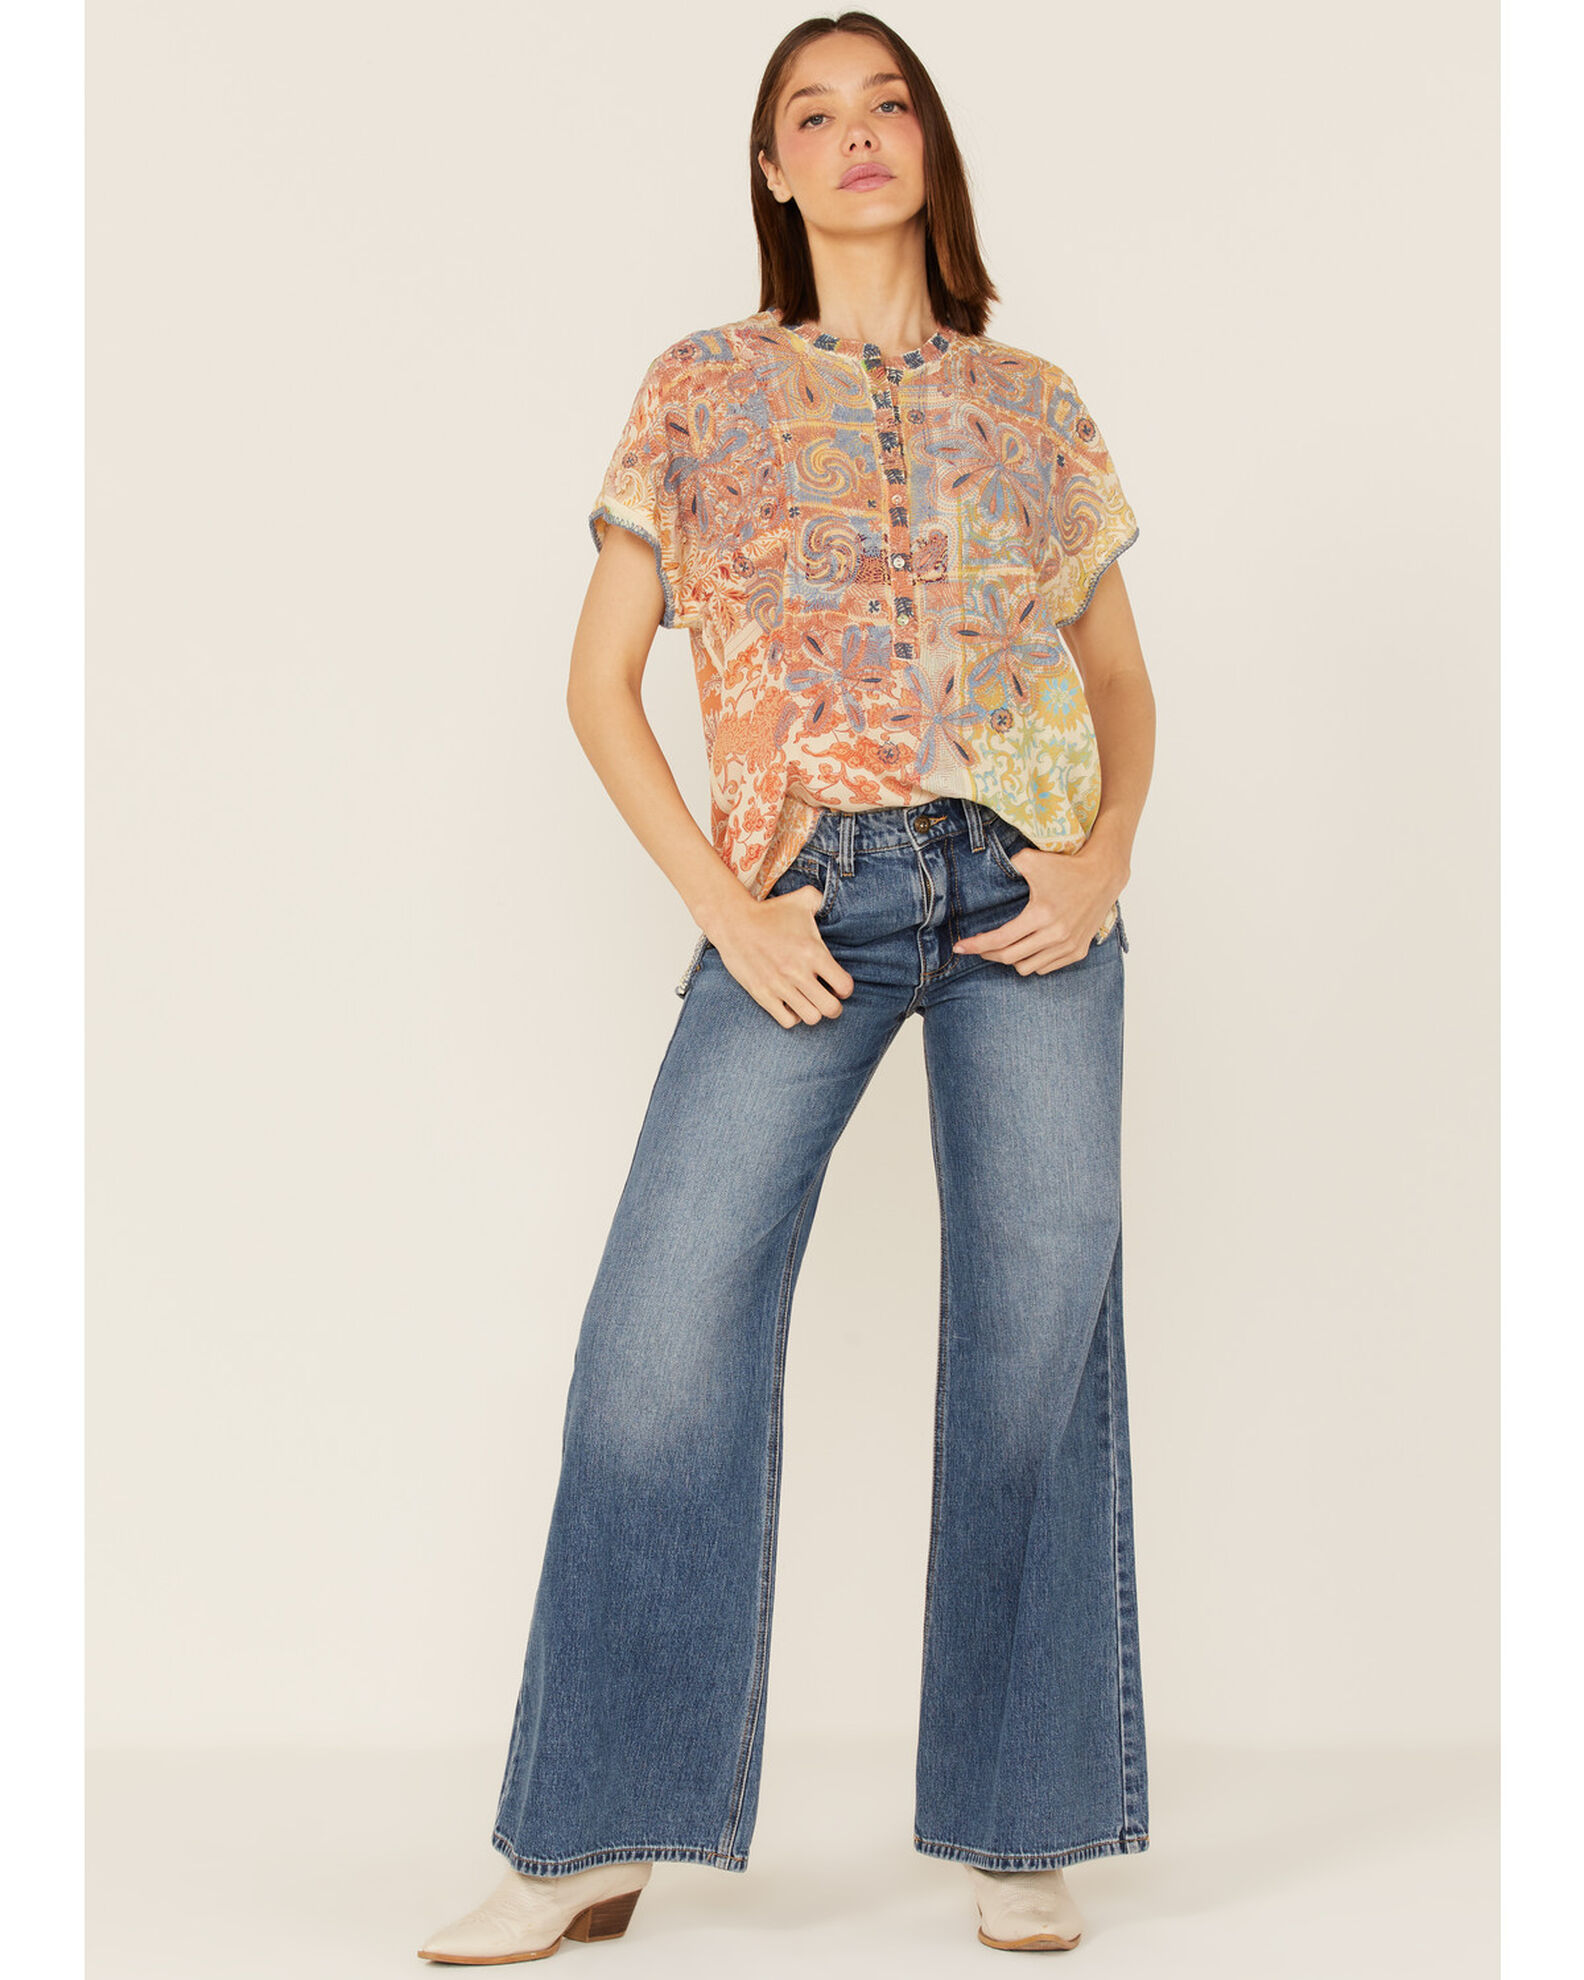 Product Name: Johnny Was Women's Prima Patchwork Embroidered Floral Blouse